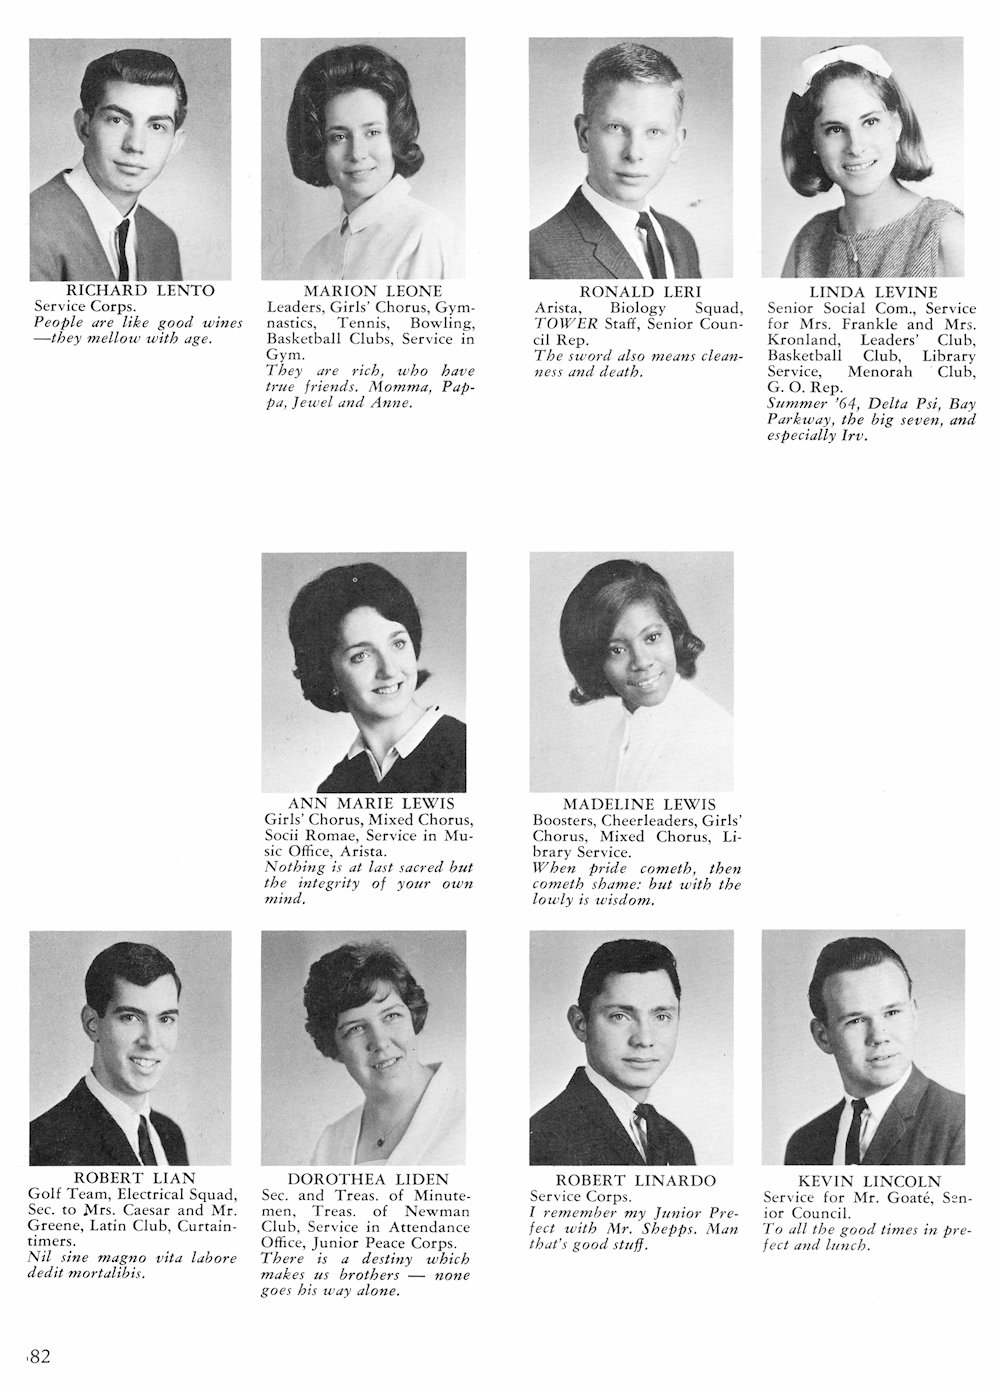 Lento-Lincoln page from Fort Hamilton High School 1965